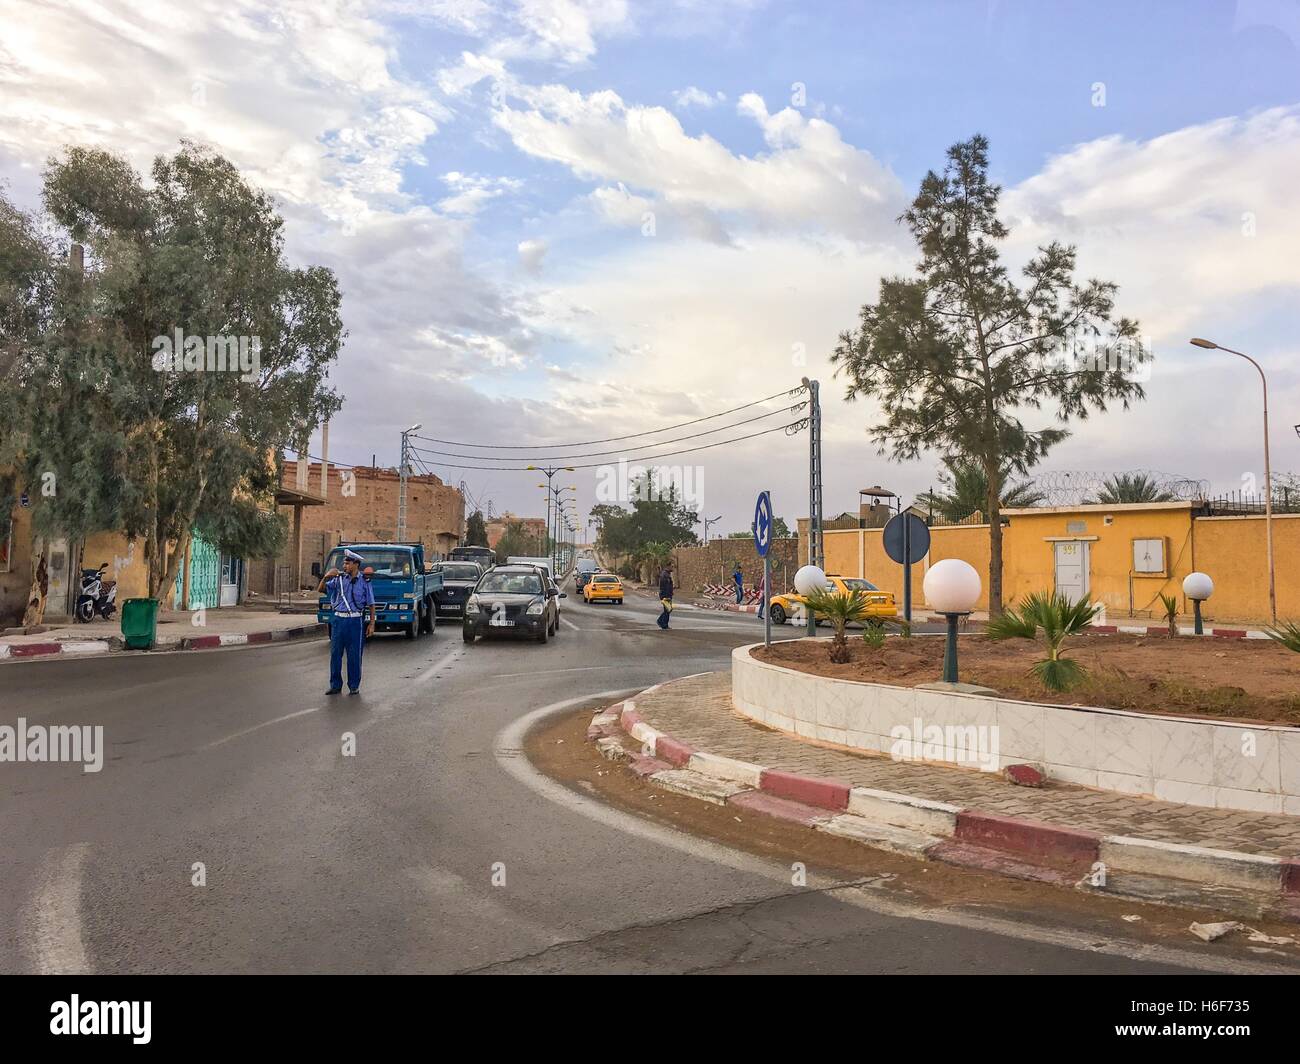 BECHAR, ALGERIA - 26 OCT 2016: A Street view of touristic city Bechar Algeria. In the past, Bechar was the center of trading of Stock Photo